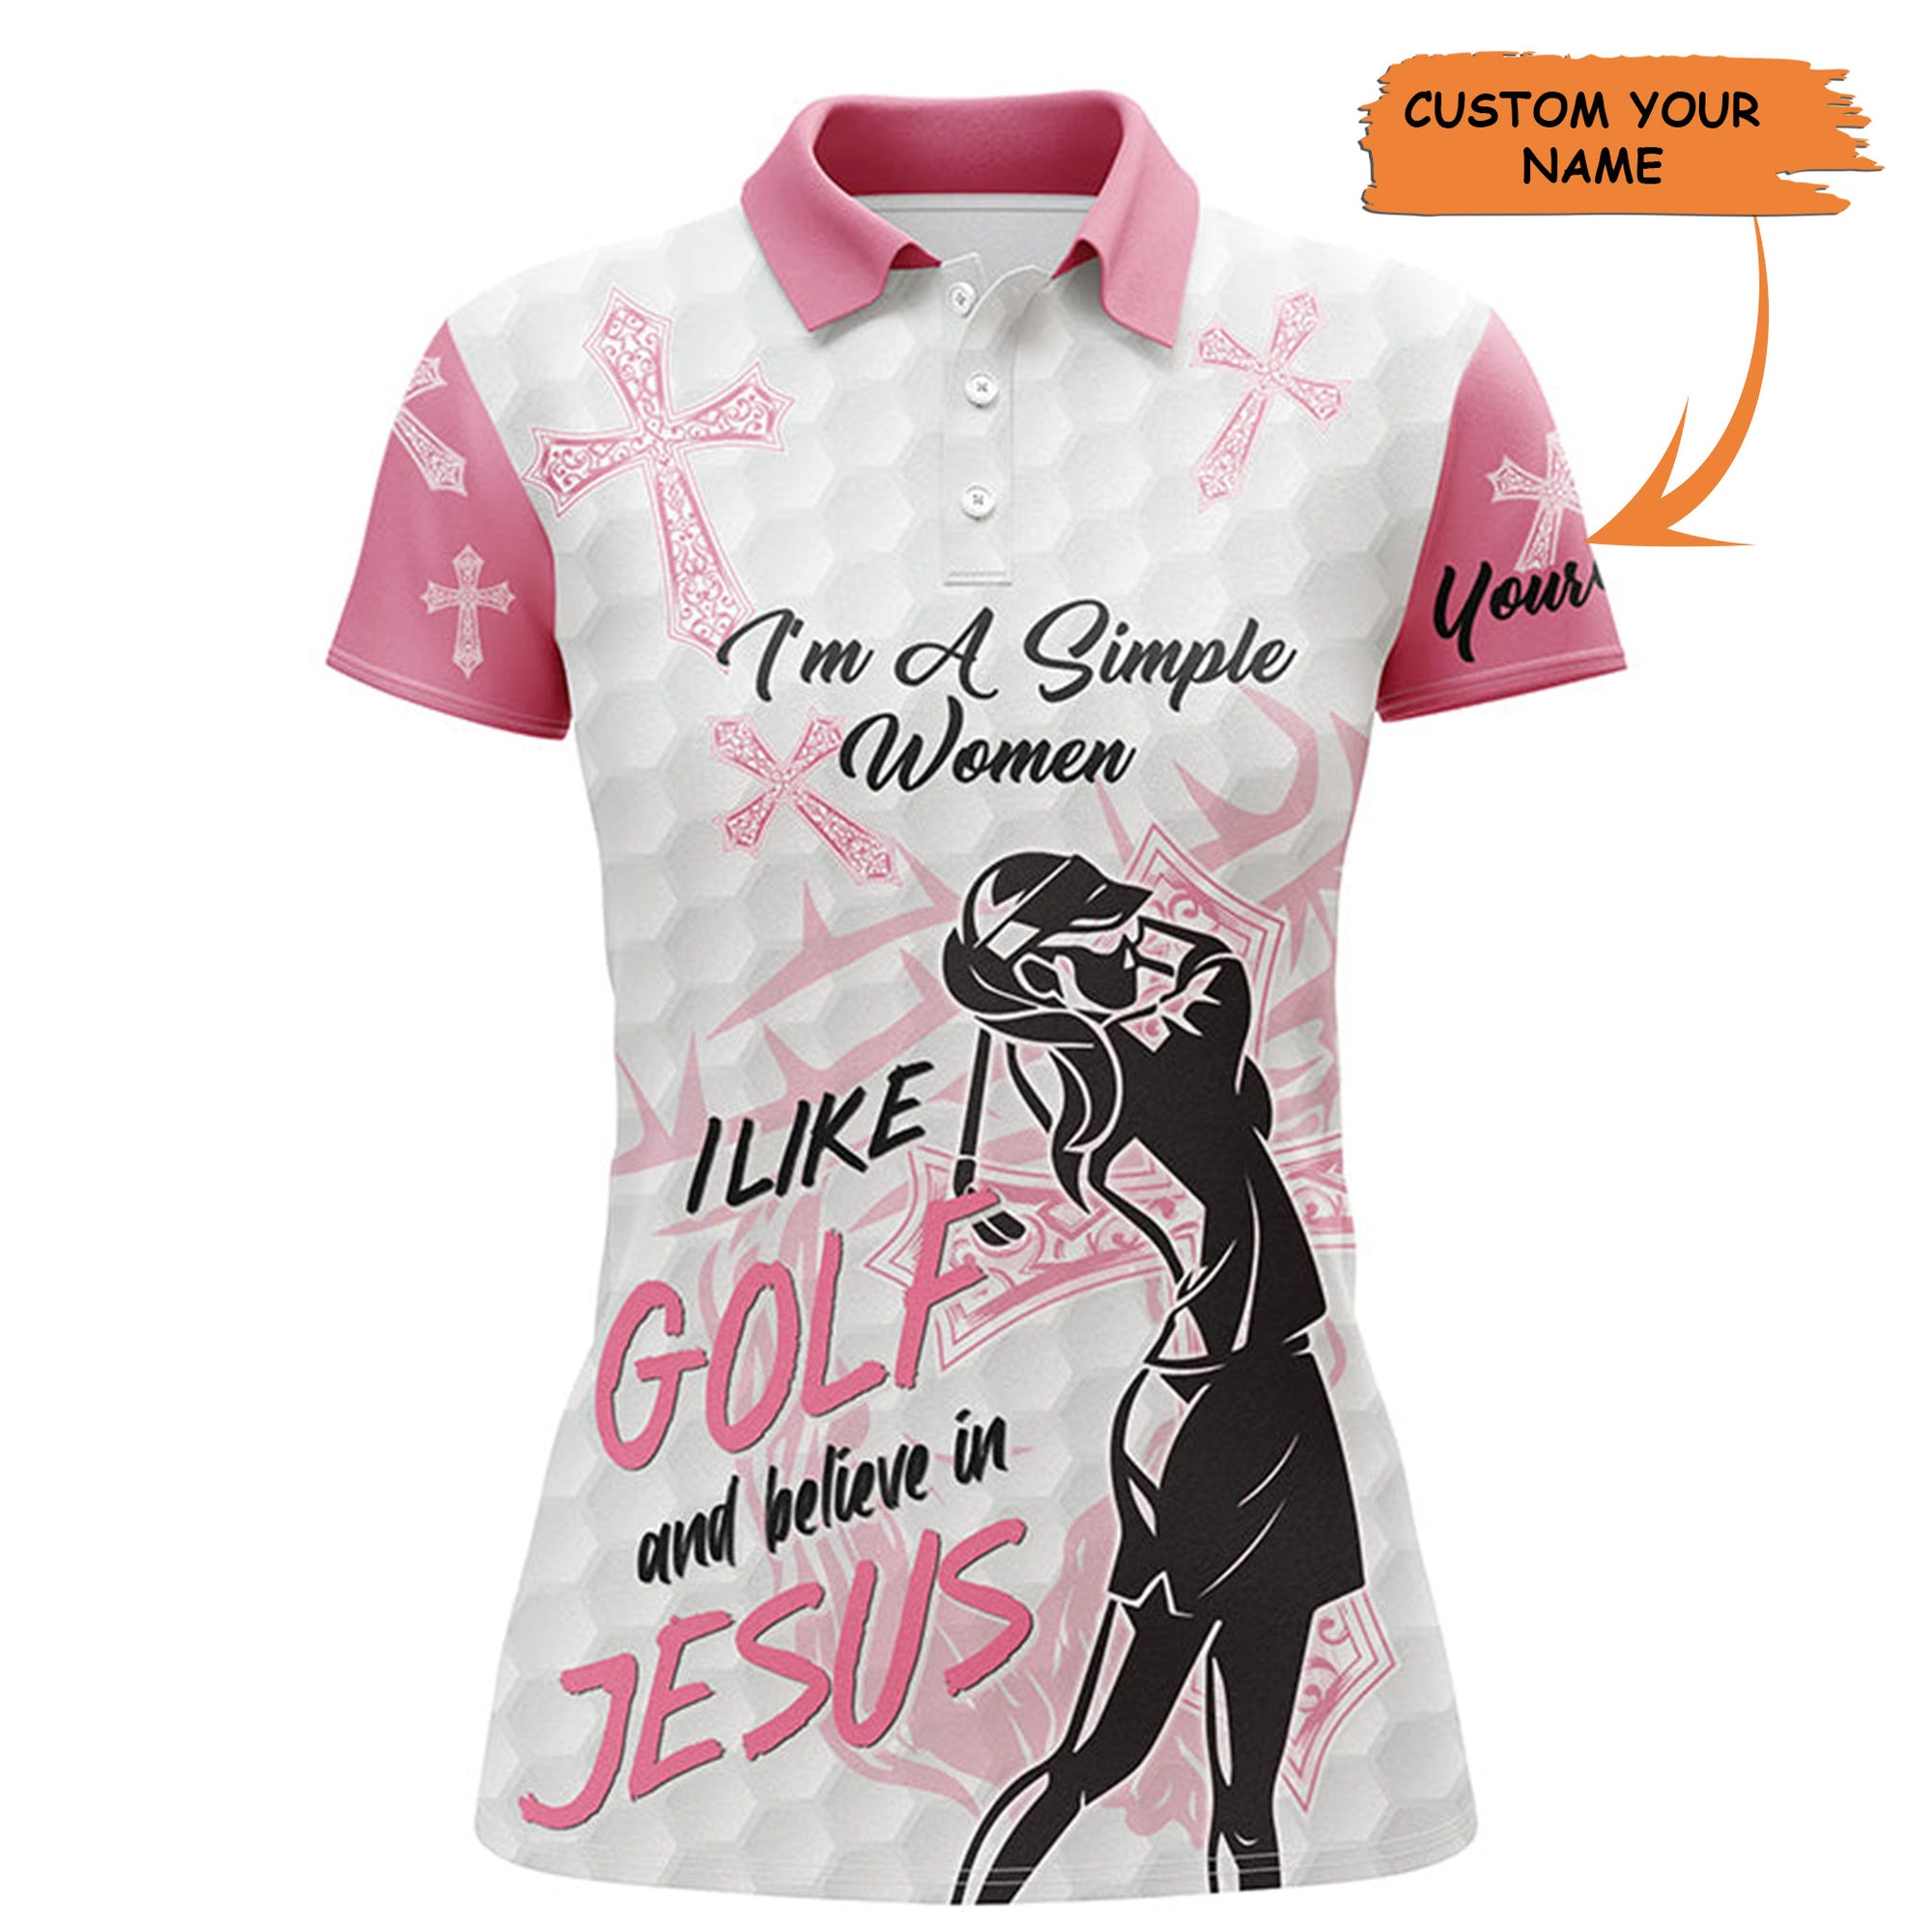 Womens Golf Polo Shirt I'm A Simple Women I Like Golf And Believe In Jesus Custom Ladies Golf Tops, Best Gift For Women